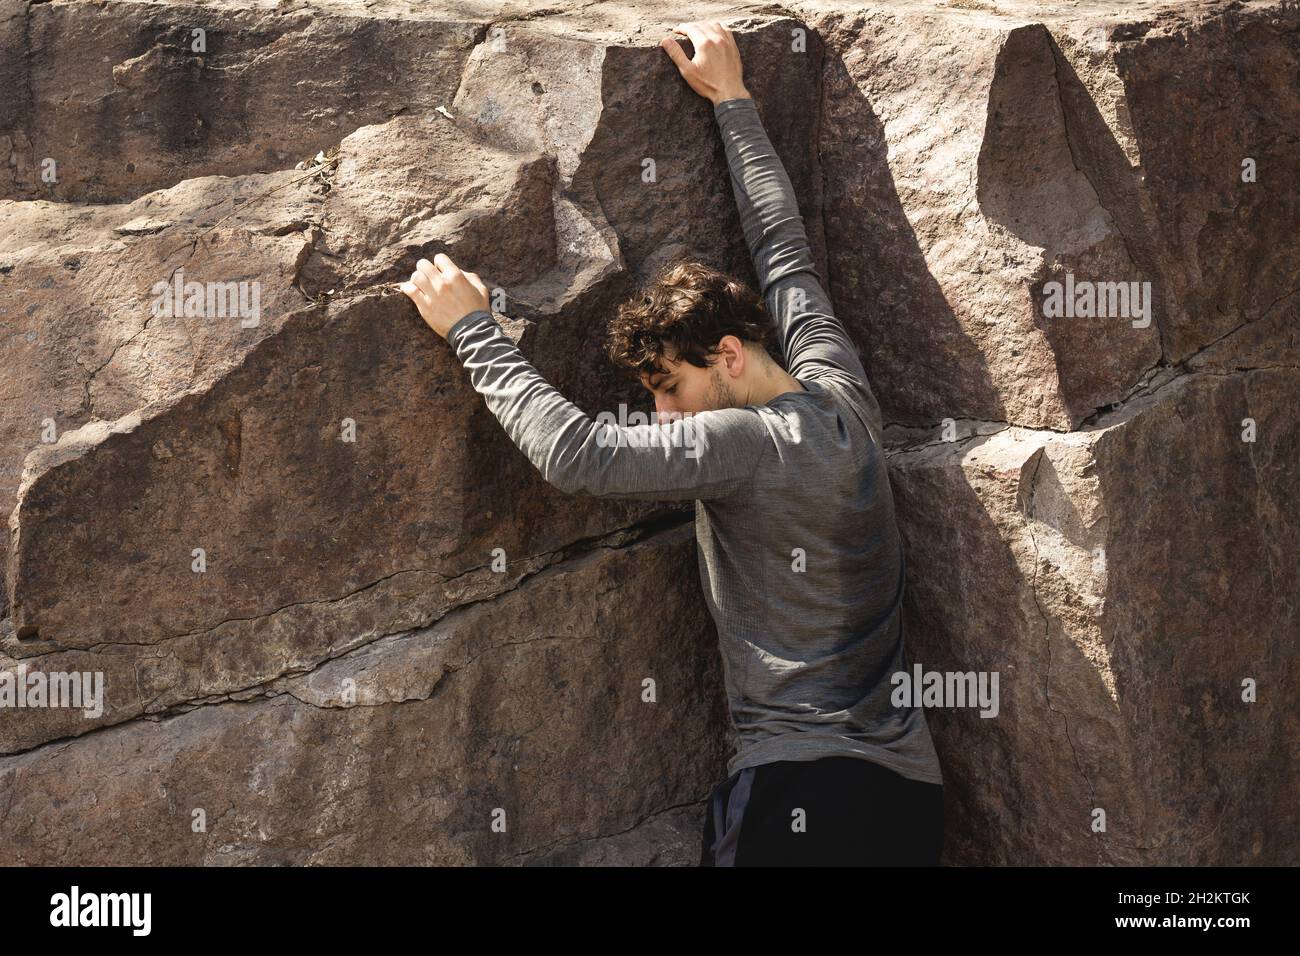 Sweaty young man climbing rock wall on sunny hot day. Outdoor workout exercise, struggle, exploration concepts Stock Photo